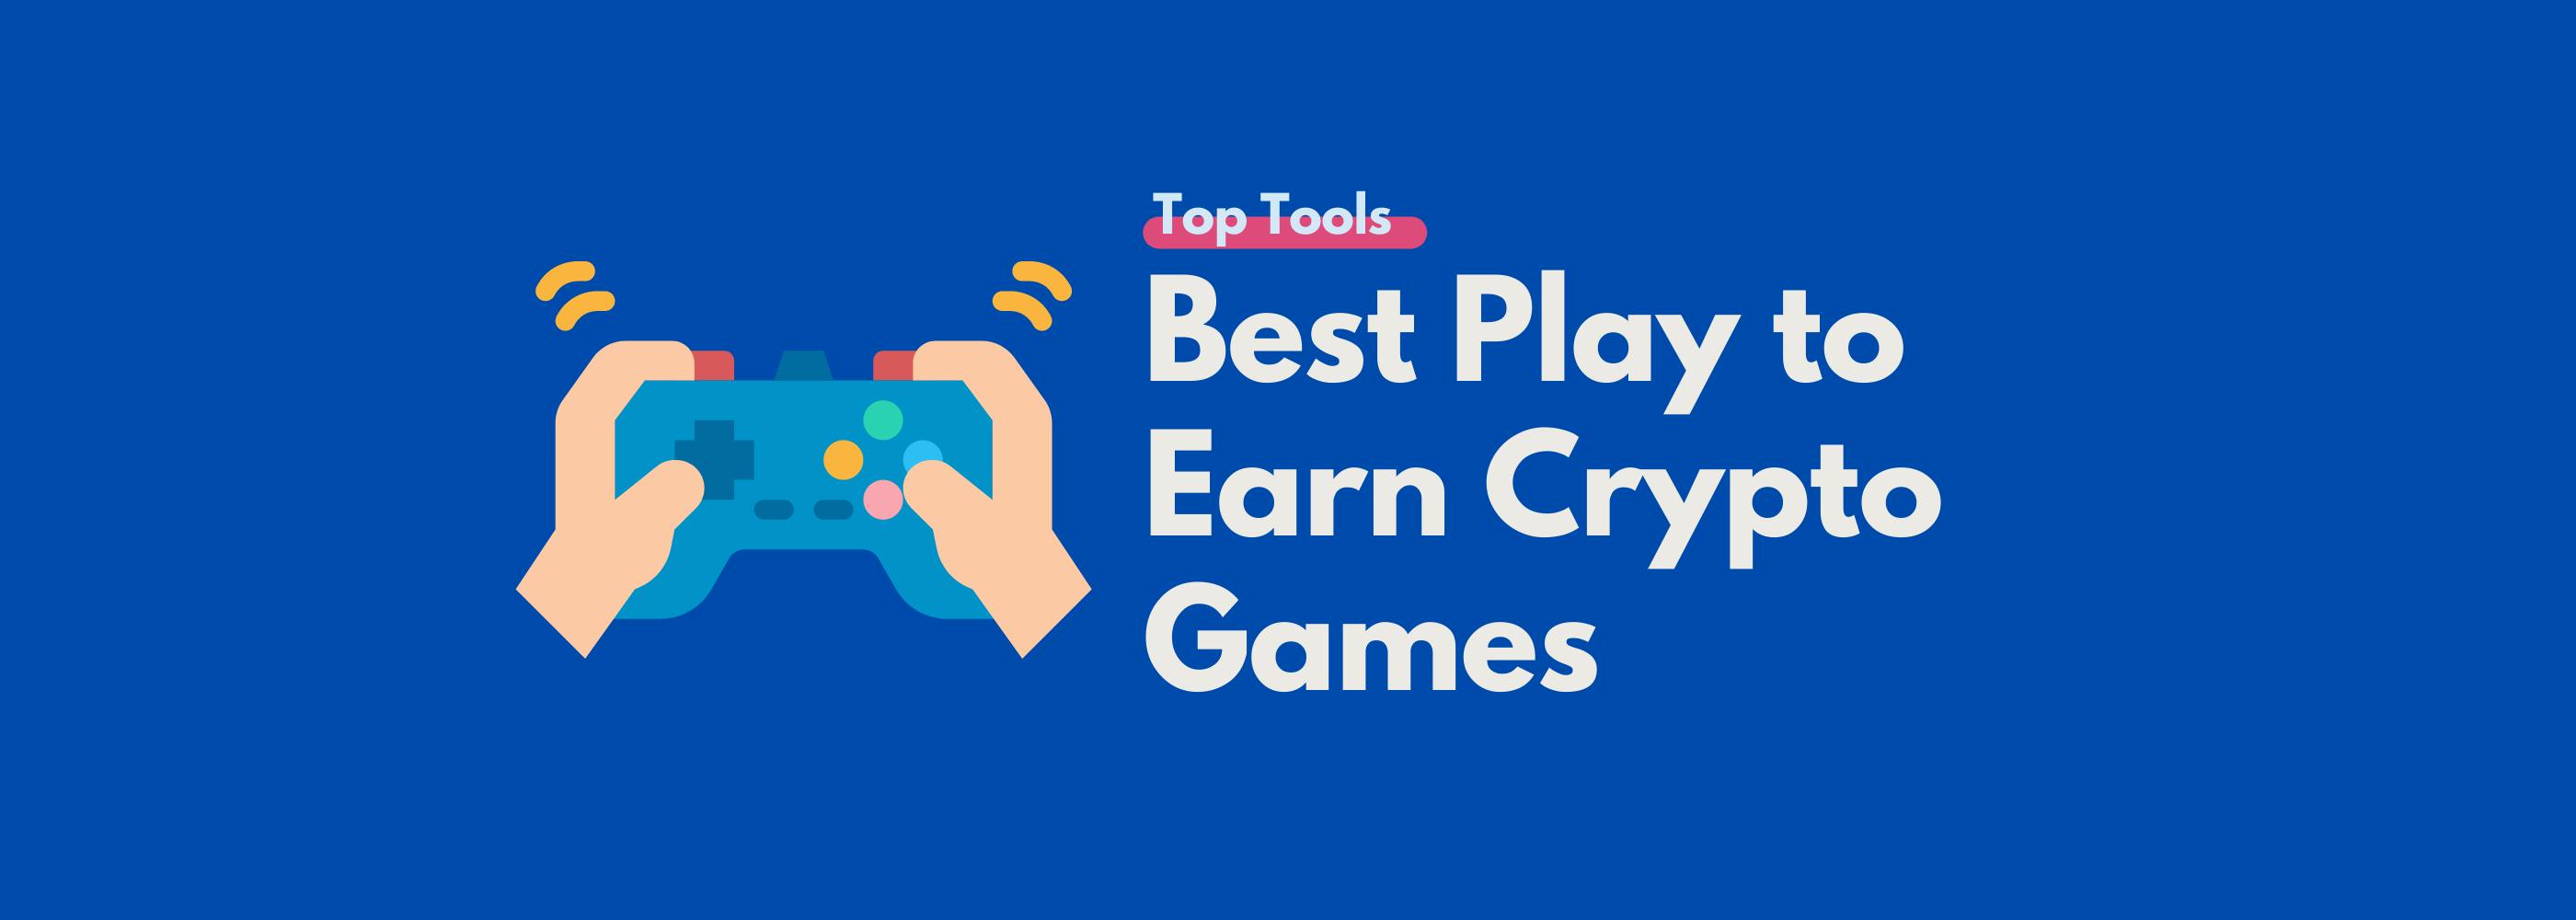 5 best play to earn crypto games